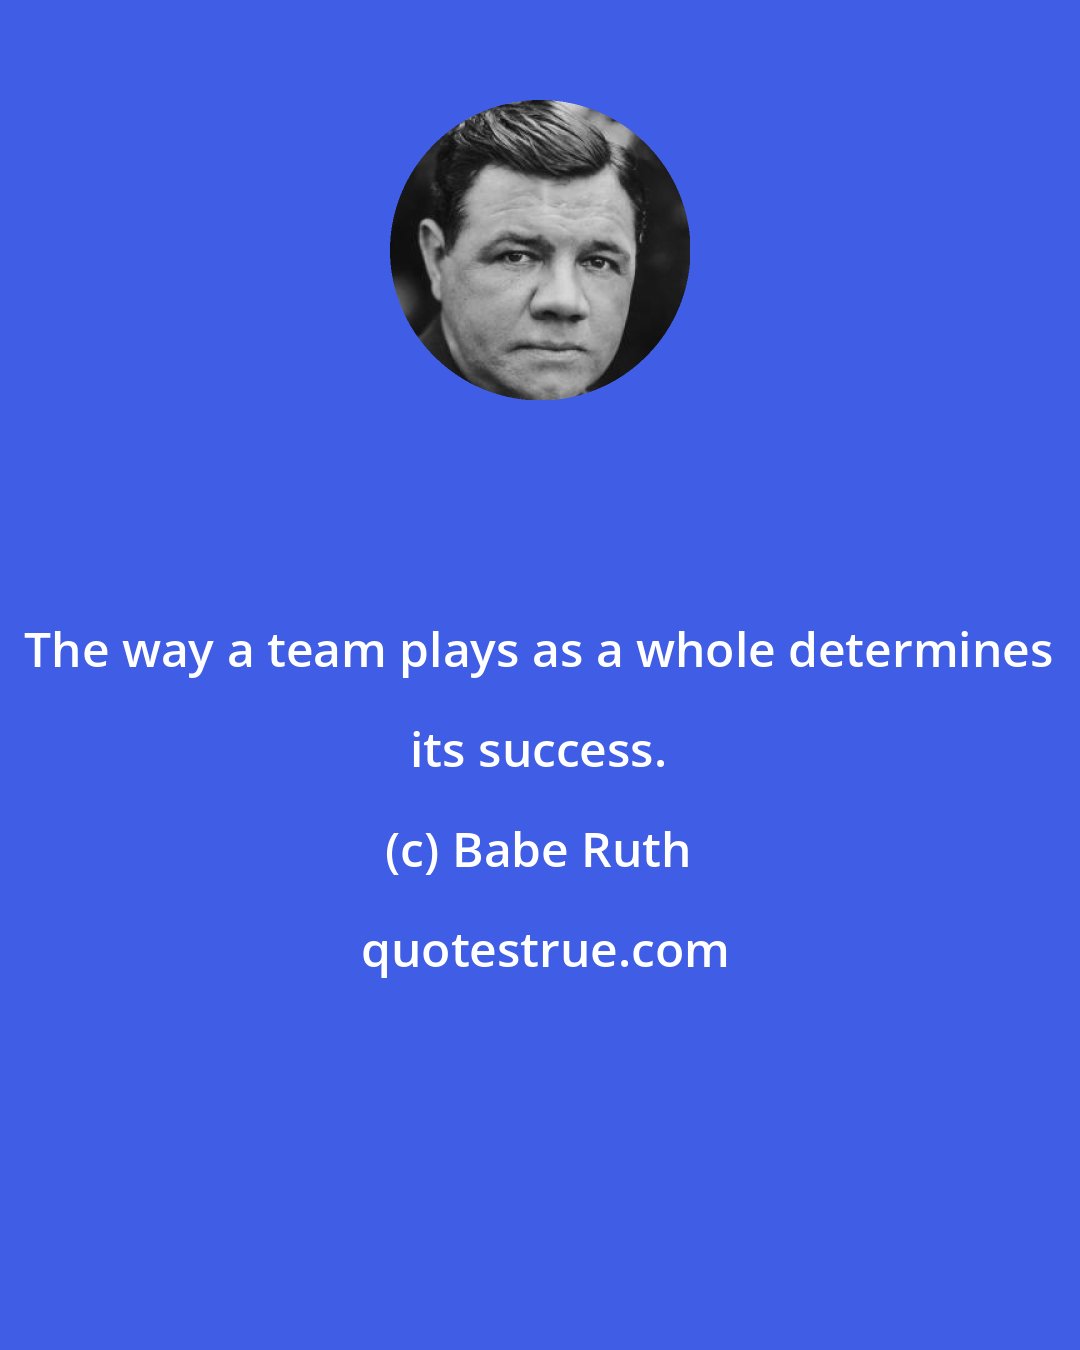 Babe Ruth: The way a team plays as a whole determines its success.